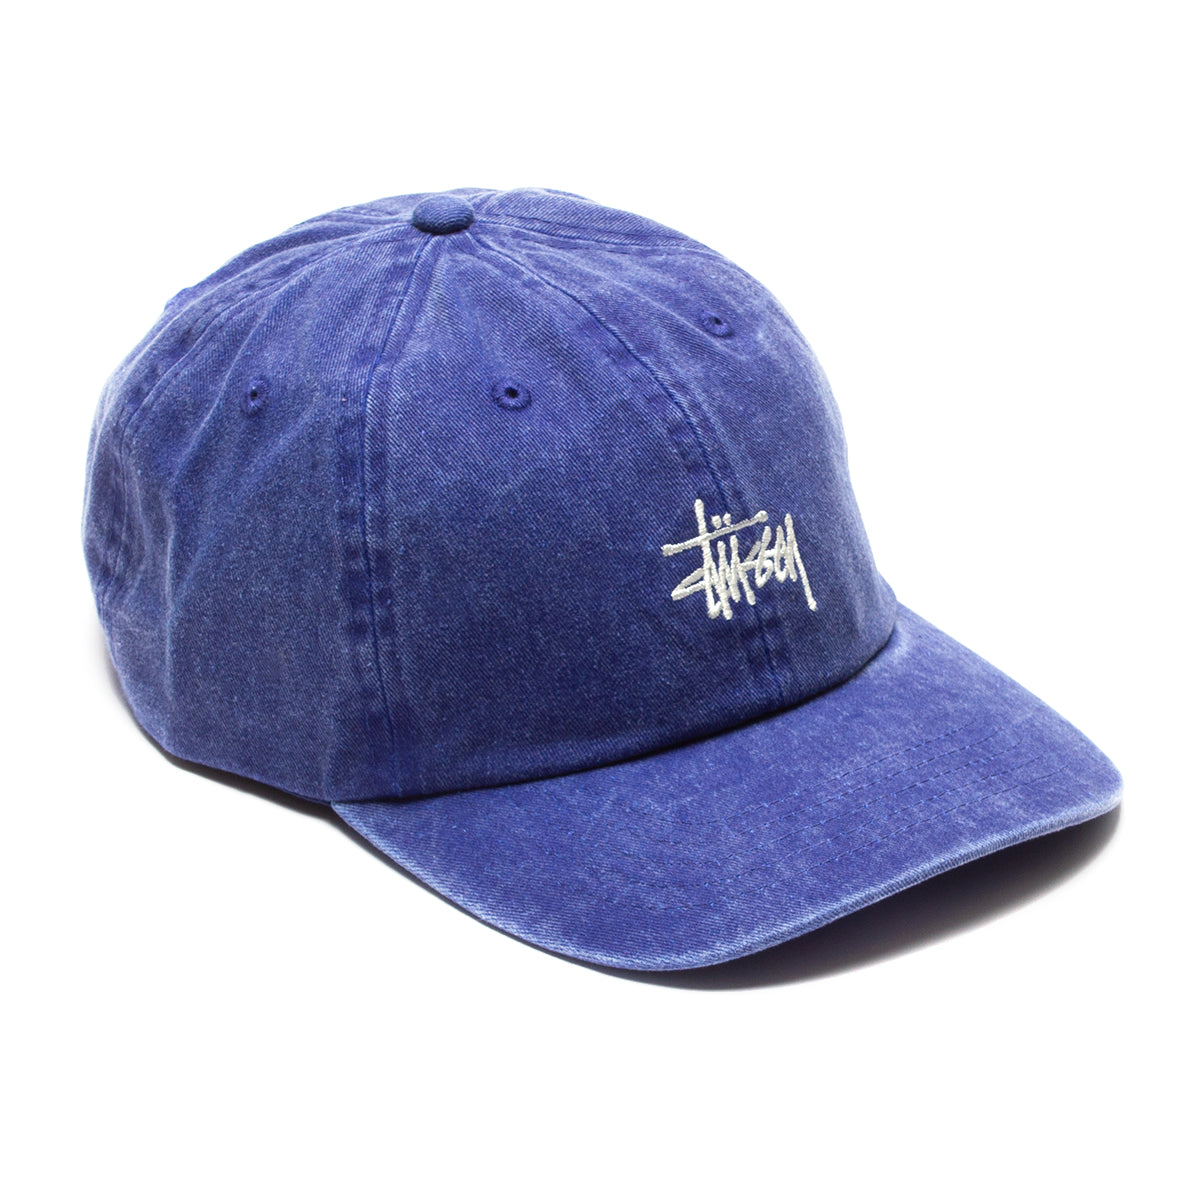 Stussy Washed Stock Low Pro Cap